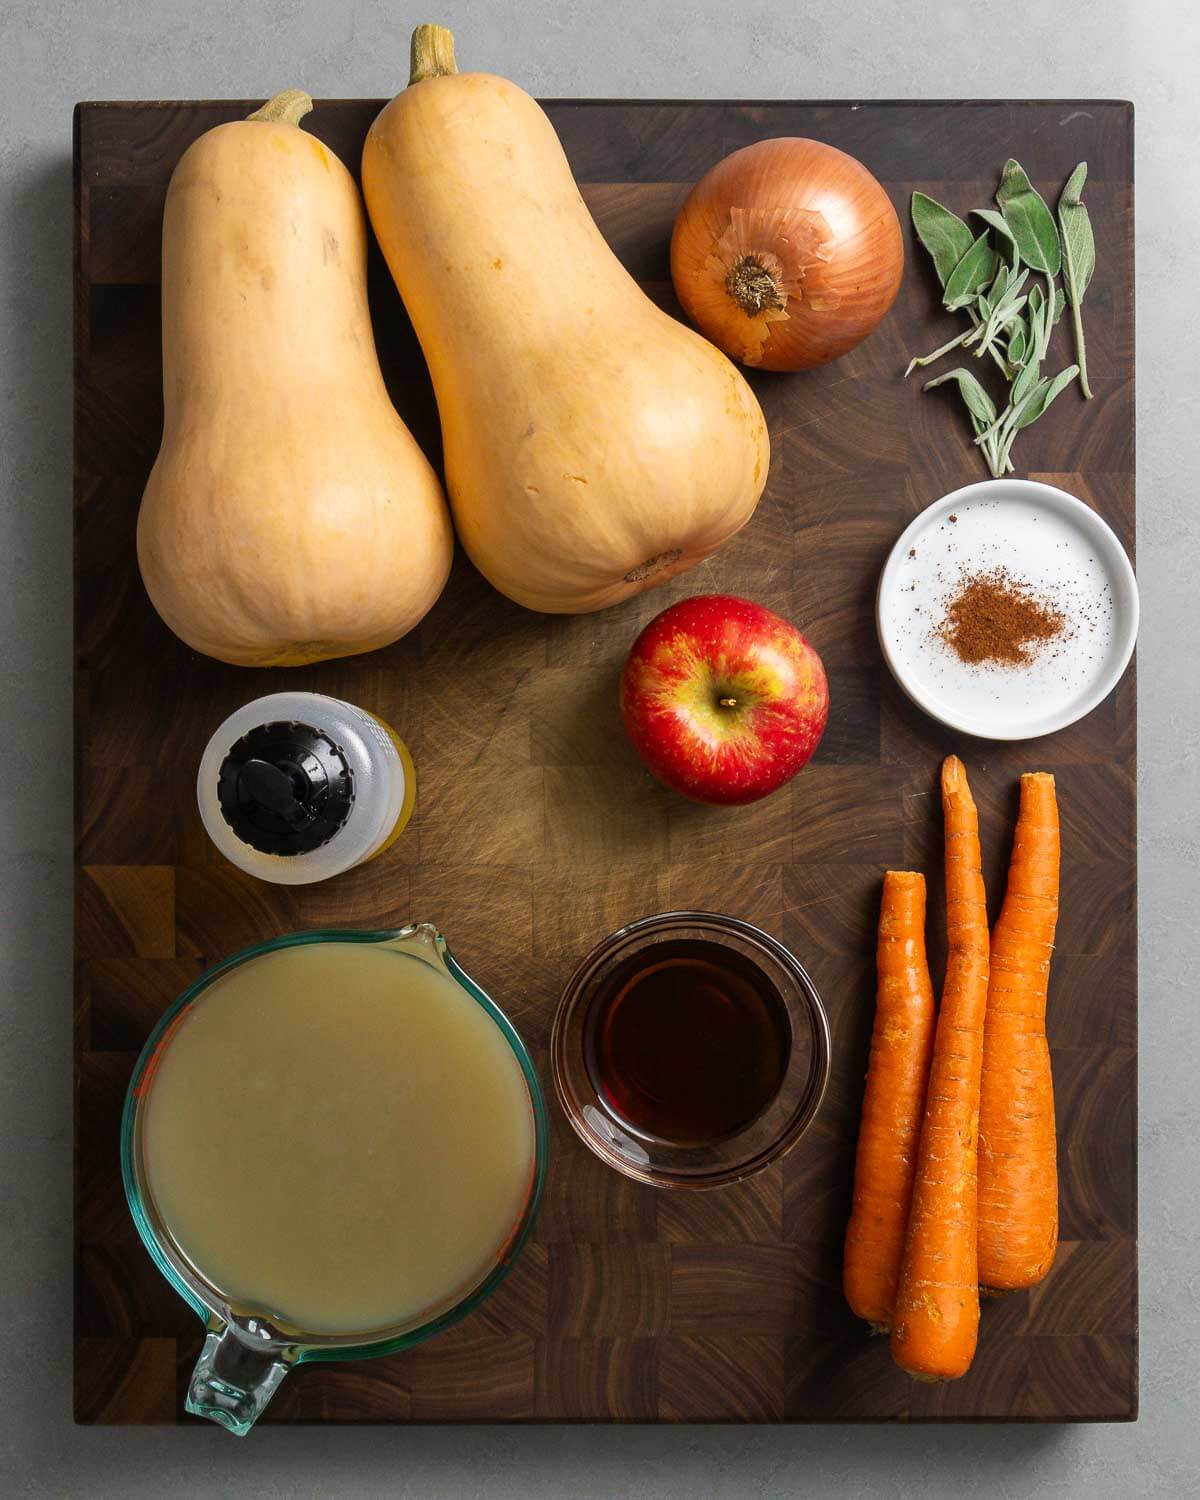 Ingredients shown: butternuts quash, onion, sage, olive oil, apple, nutmeg, vegetable stock, maple syrup, and carrots.